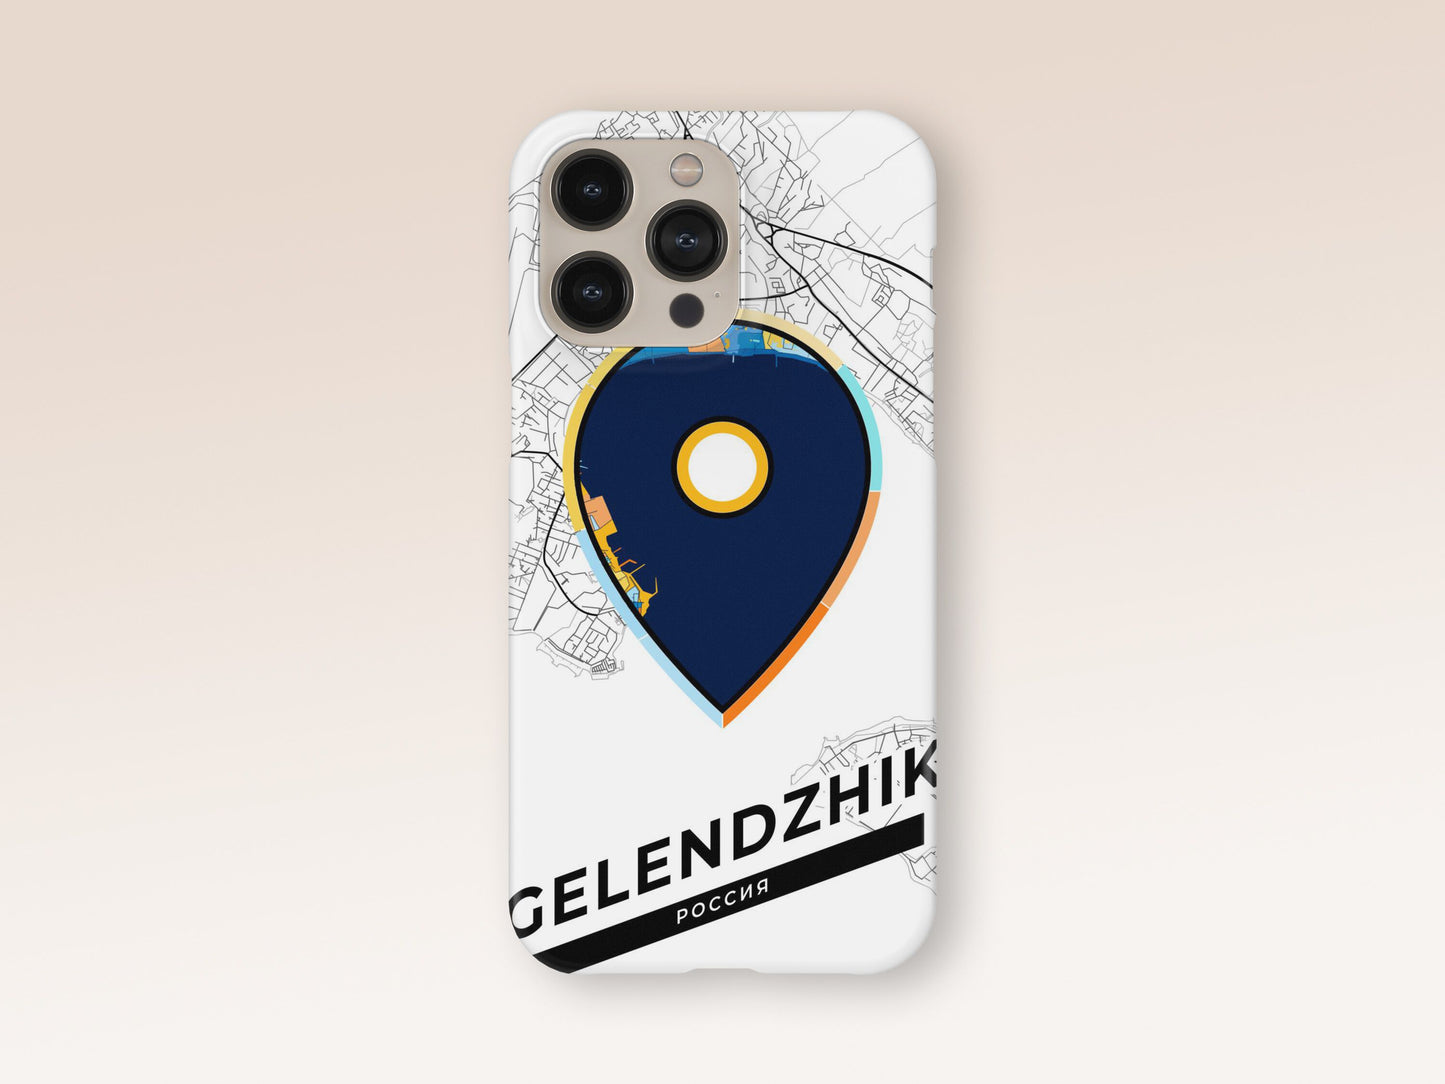 Gelendzhik Russia slim phone case with colorful icon. Birthday, wedding or housewarming gift. Couple match cases. 1